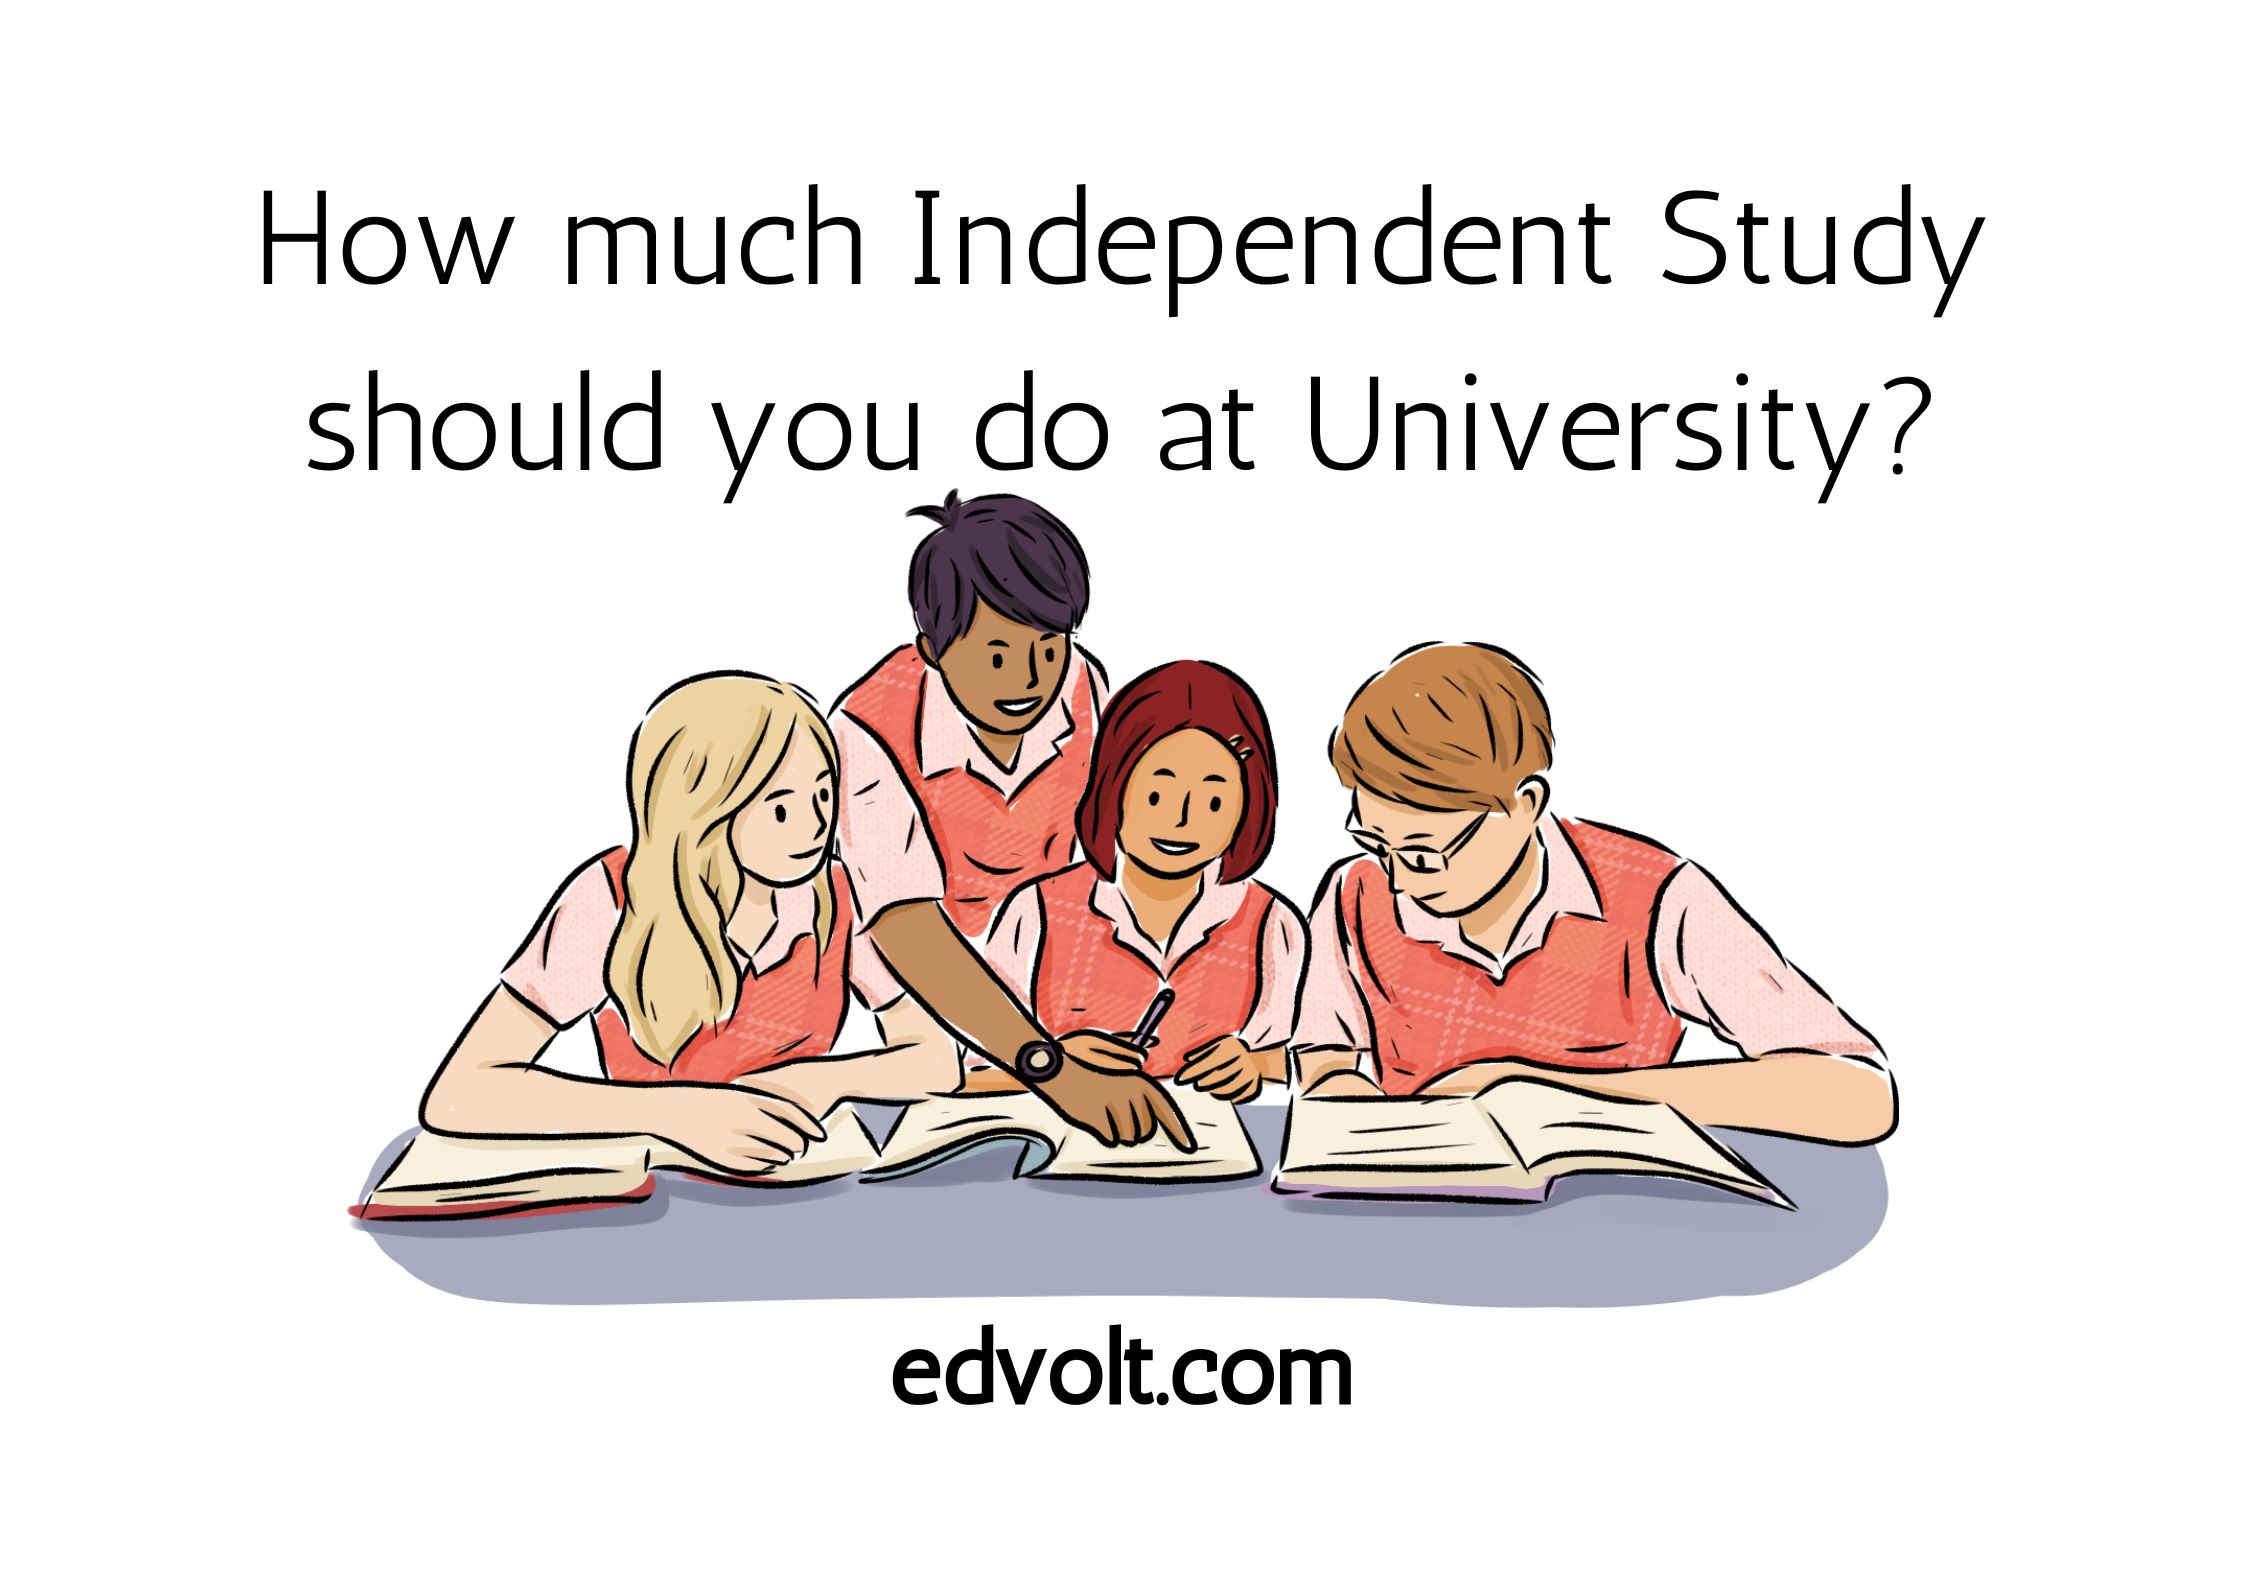 How much Independent Study should you do at University?